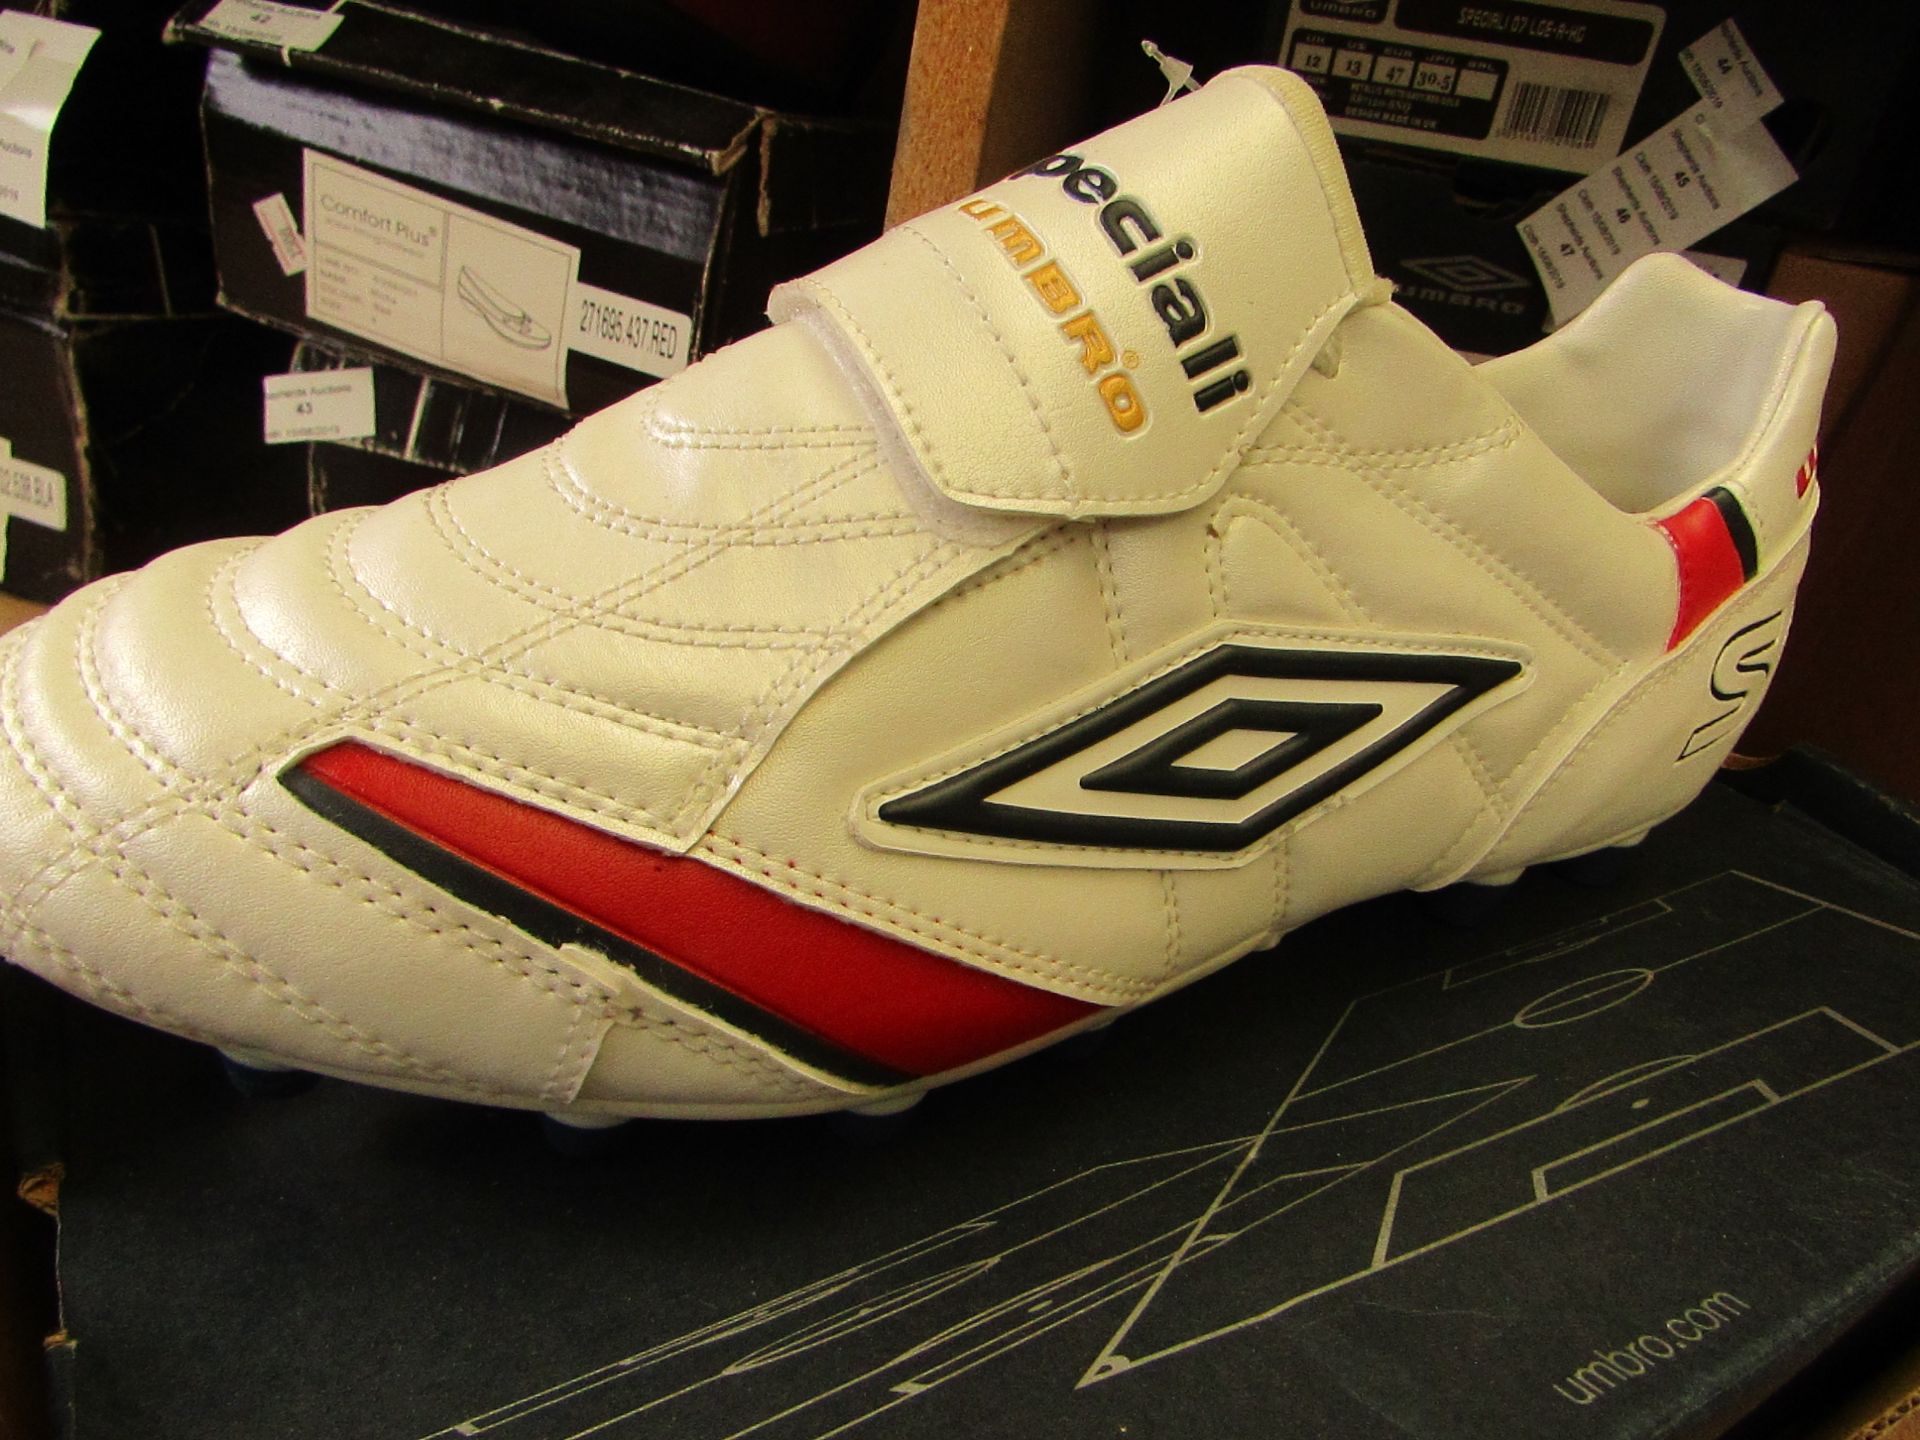 Umbro Speciali Football Boots size 12 new & boxed